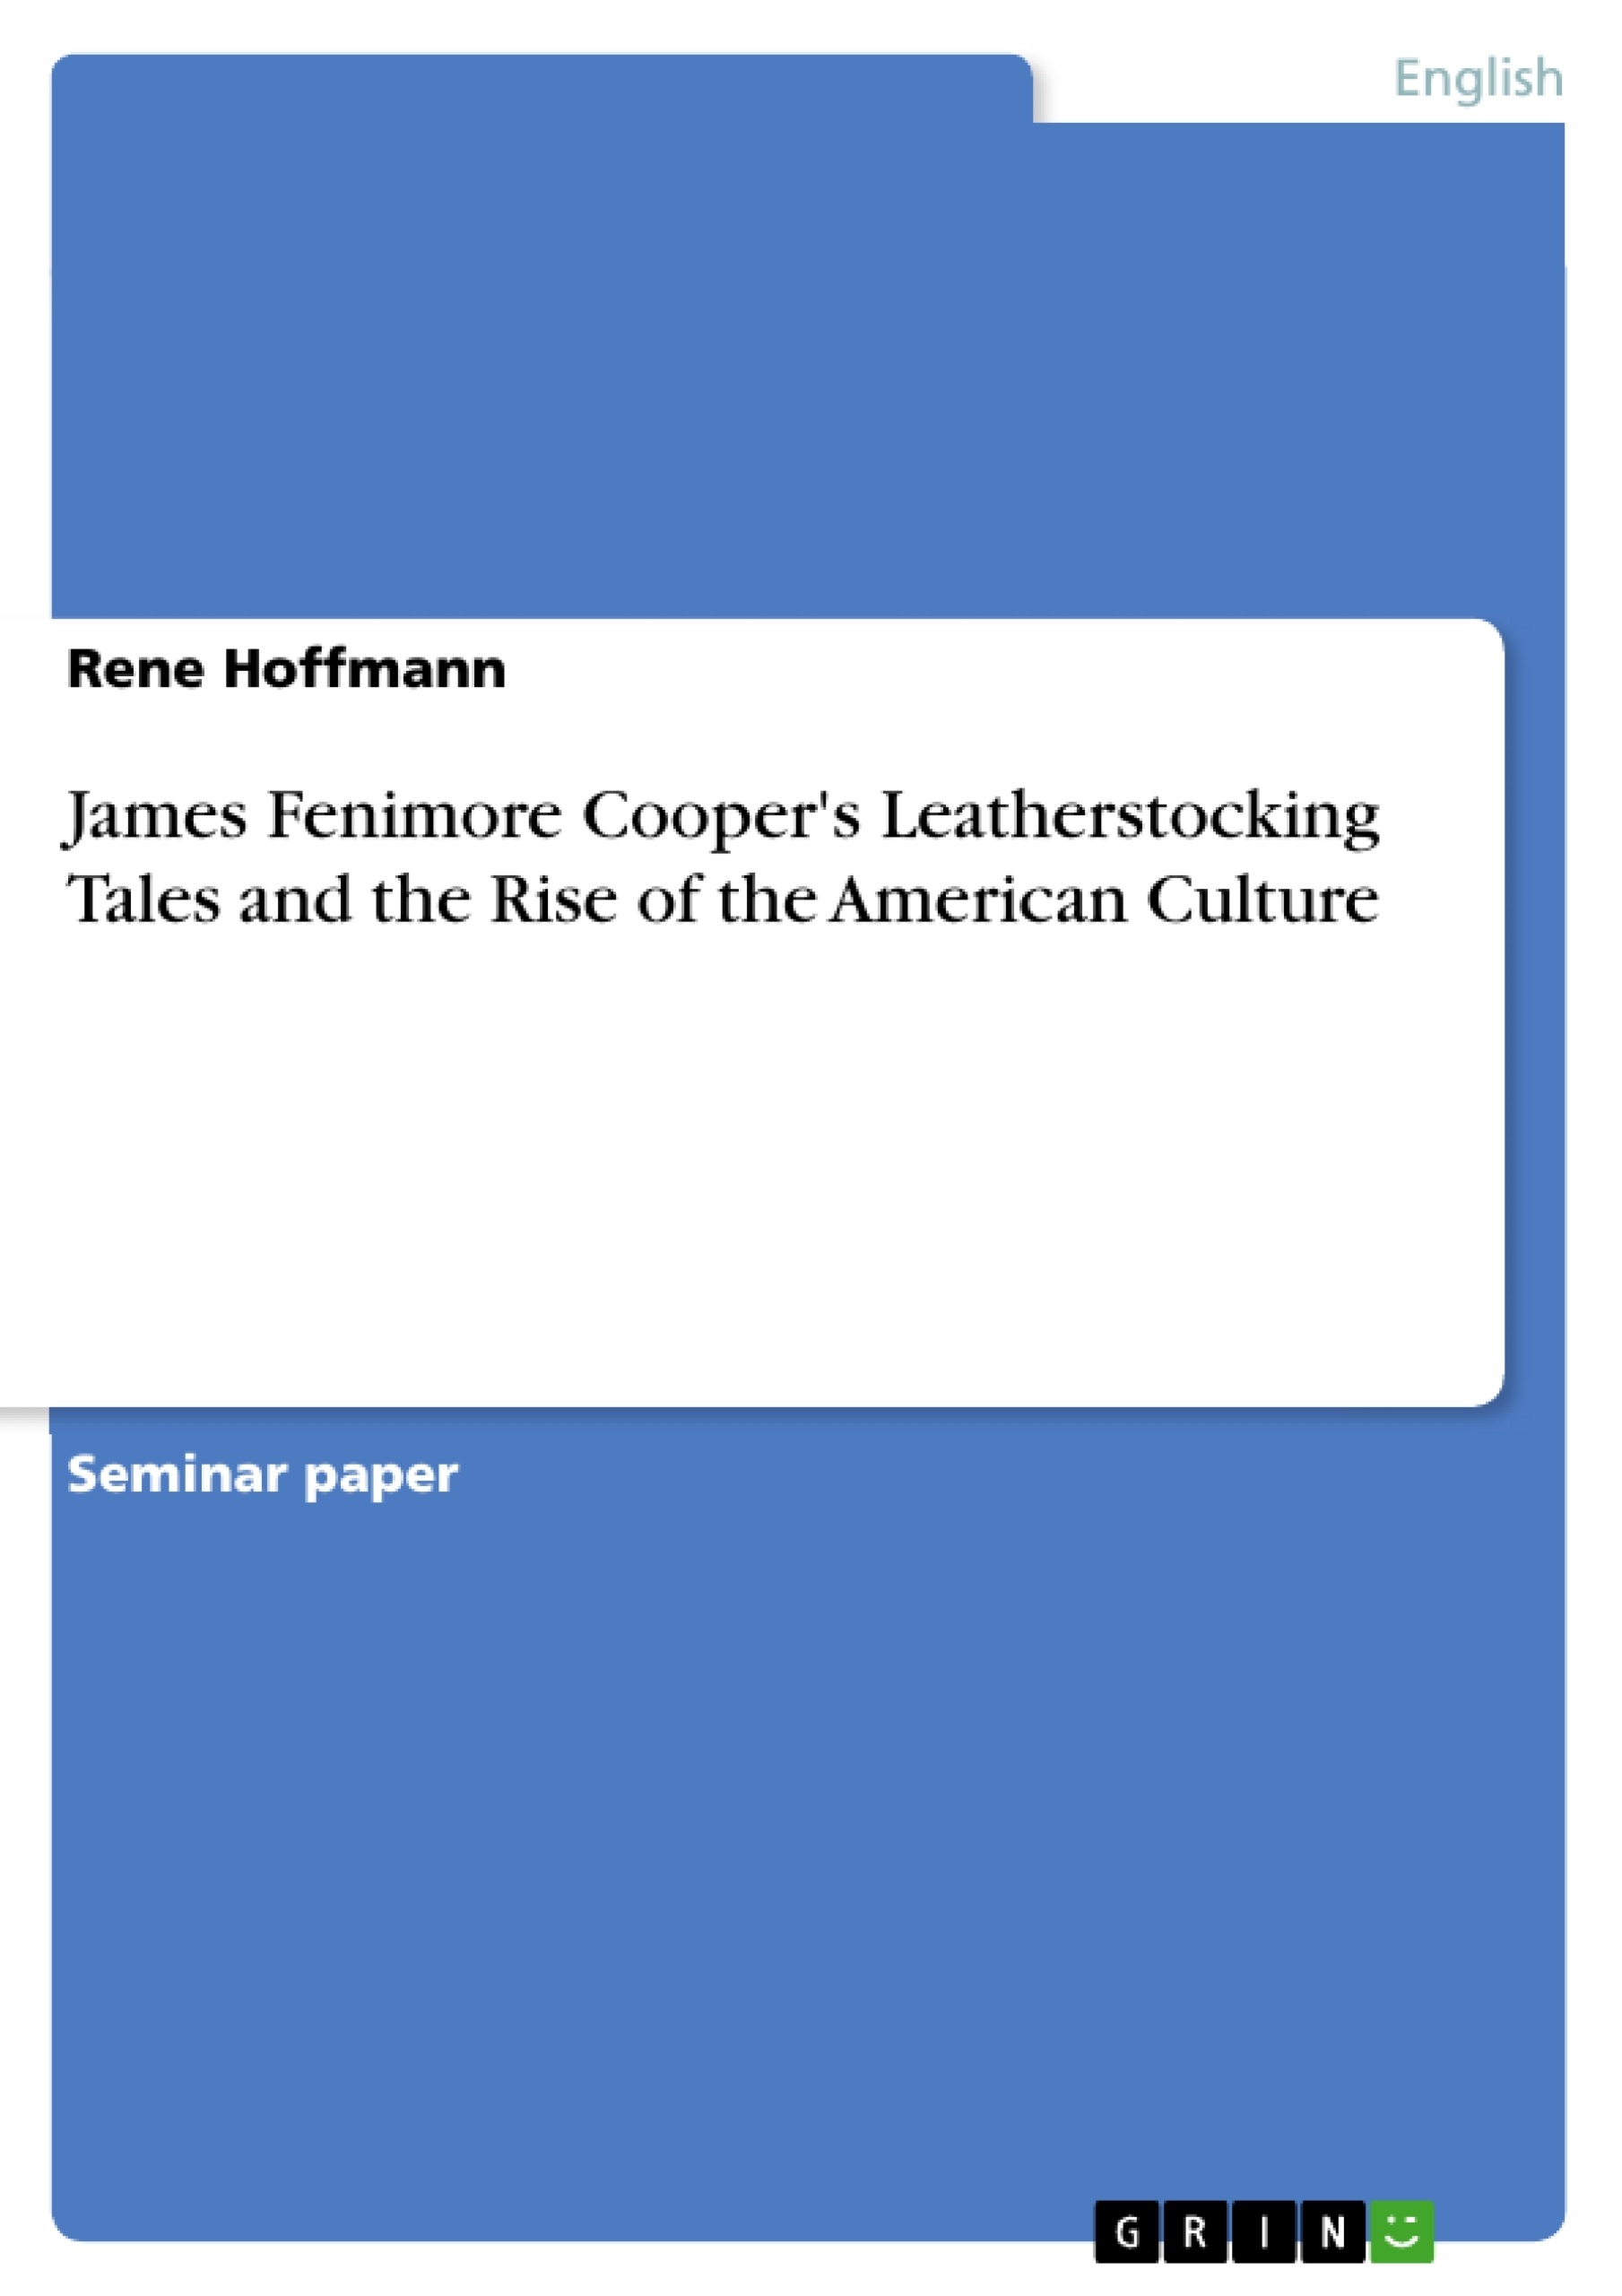 Title: James Fenimore Cooper's Leatherstocking Tales and the Rise of the American Culture